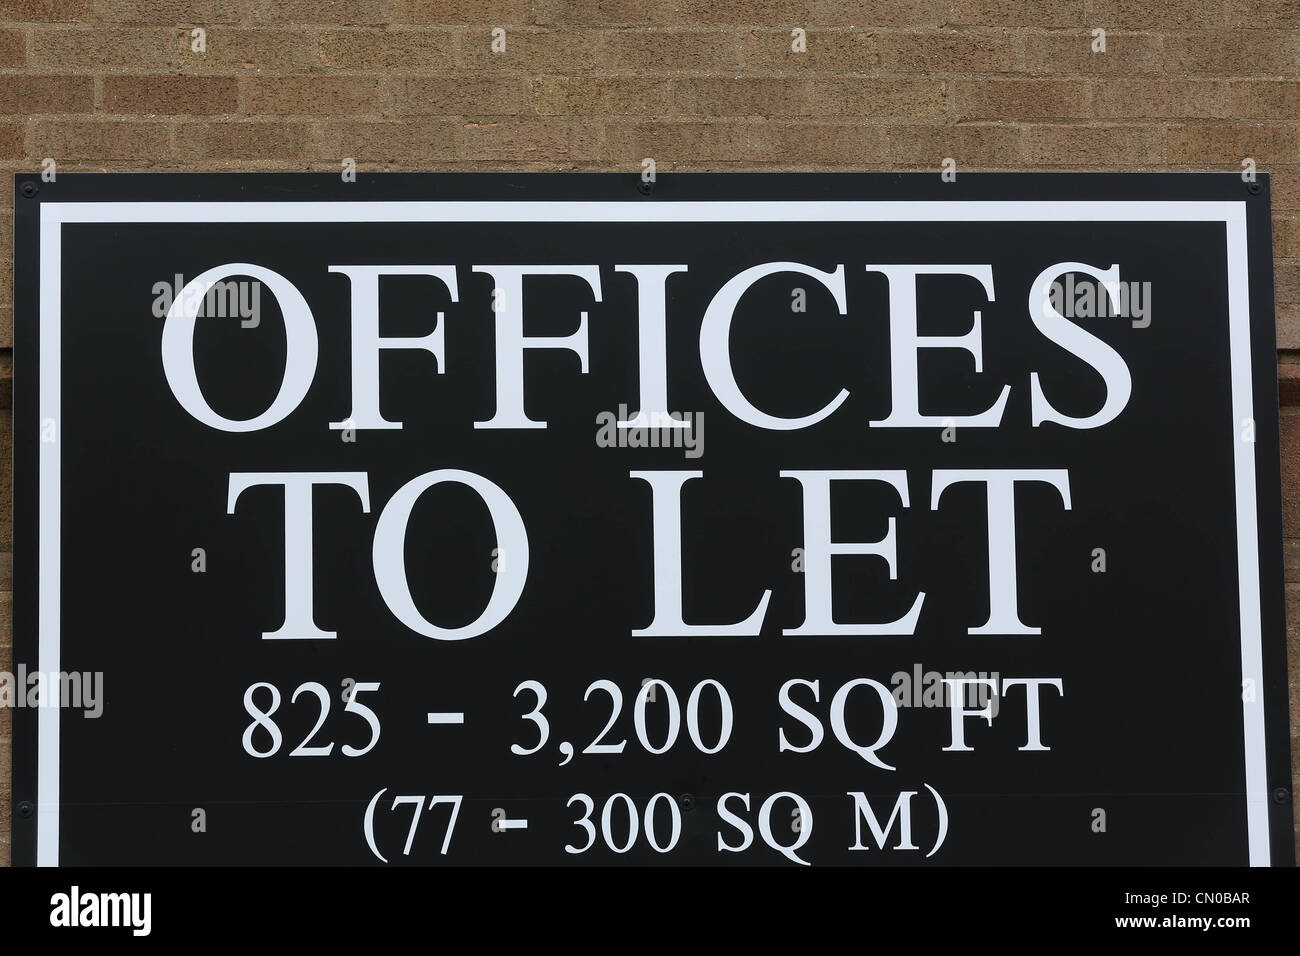 Offices to let sign Stock Photo